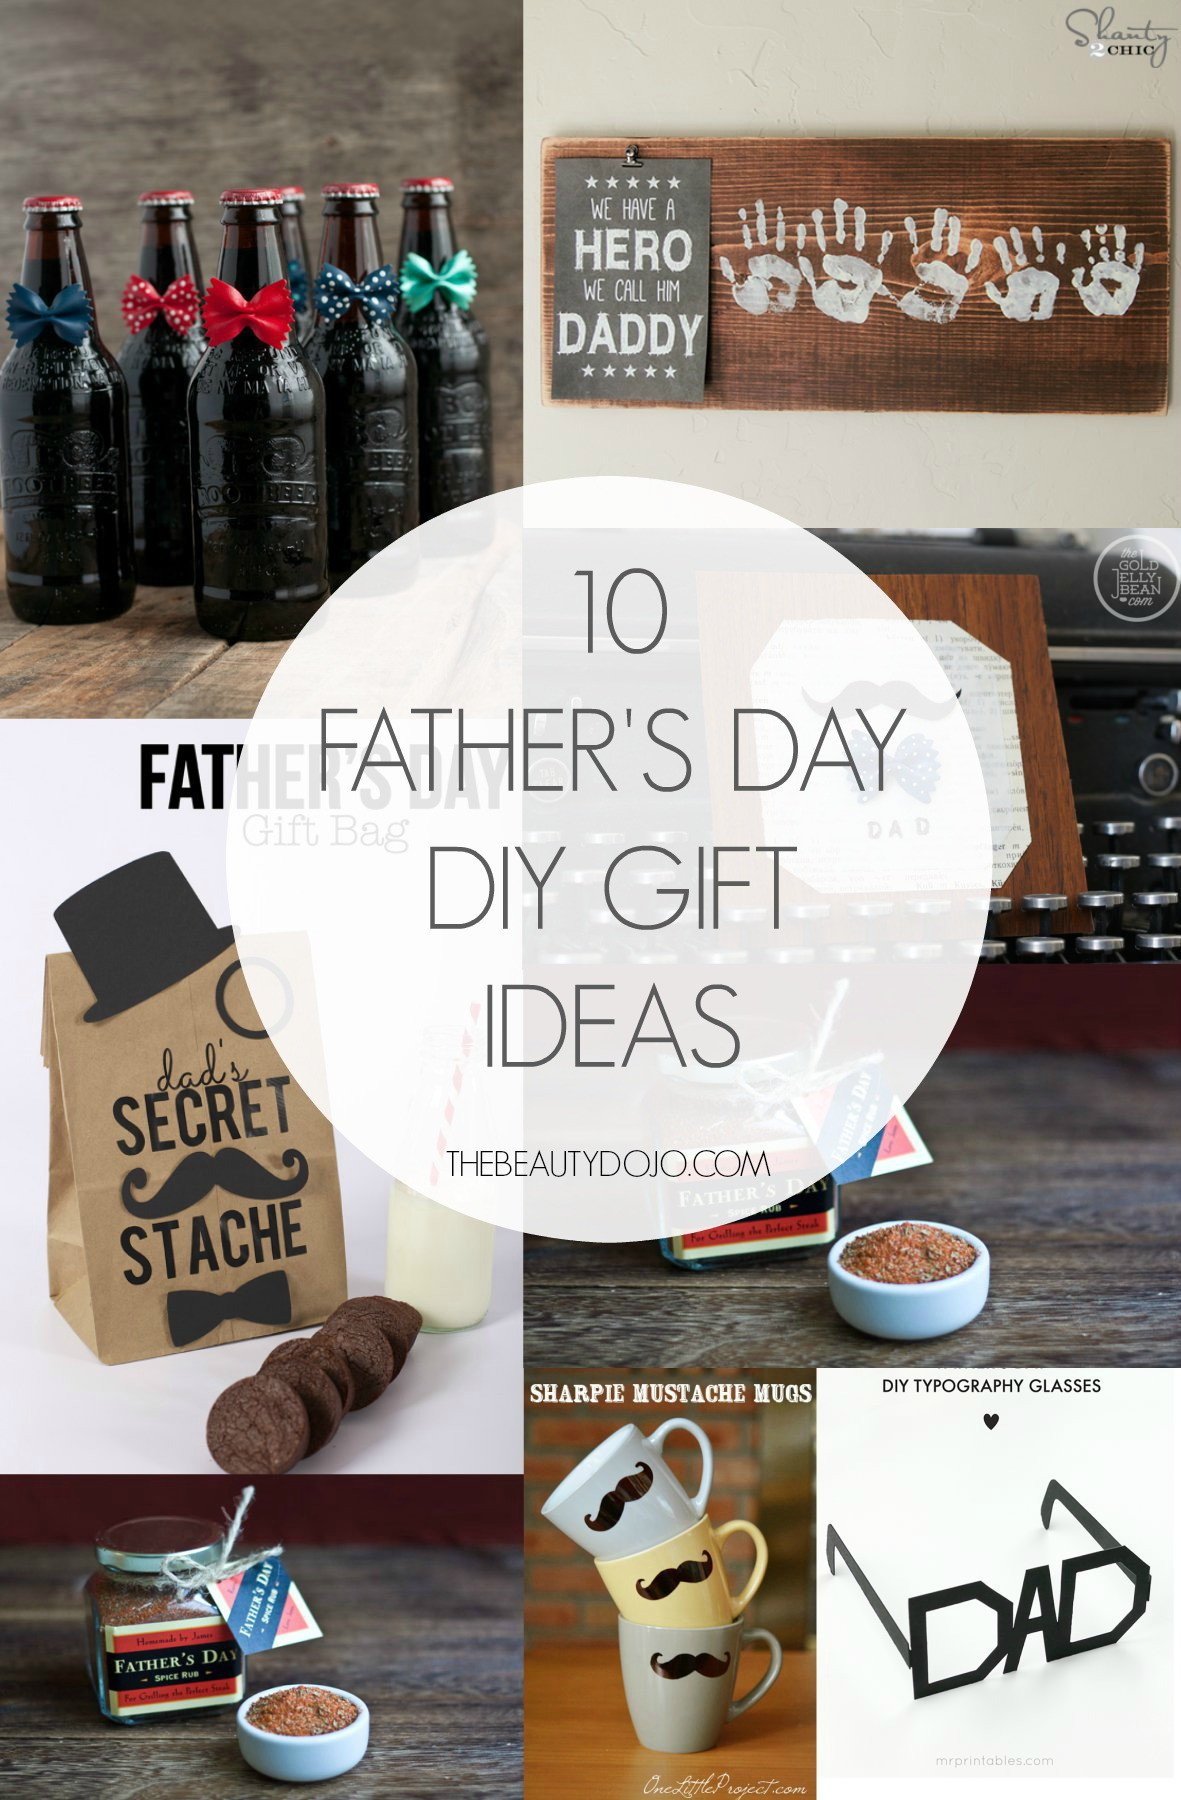 Fathers Days Gift Ideas
 10 Father s Day DIY Gift Ideas The Beautydojo